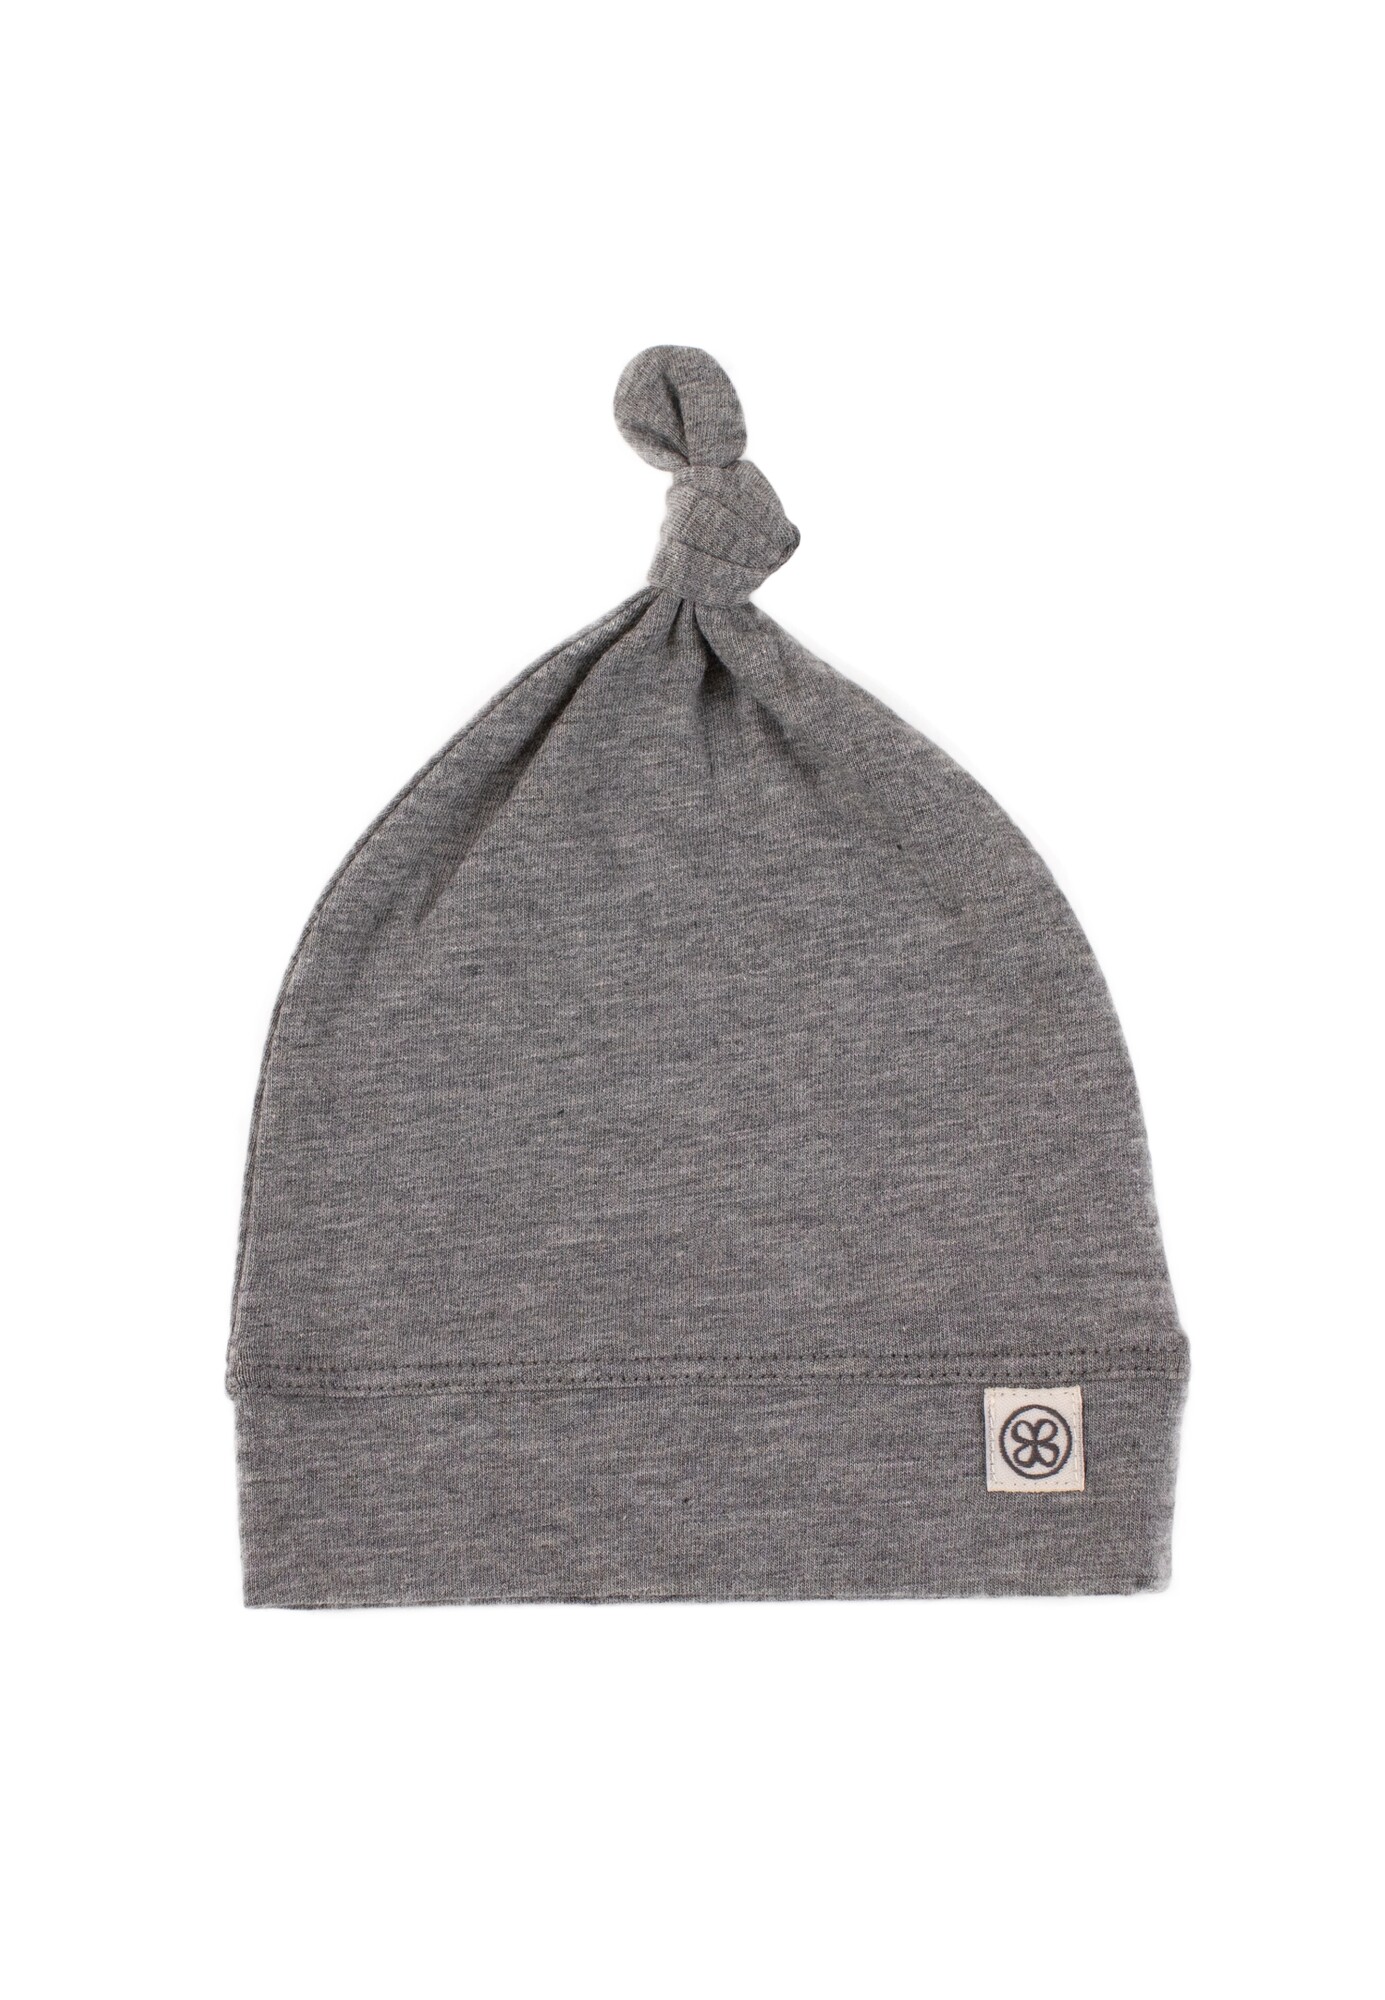 Cloby - UV resistant Beanie hat for babies - Stone Grey